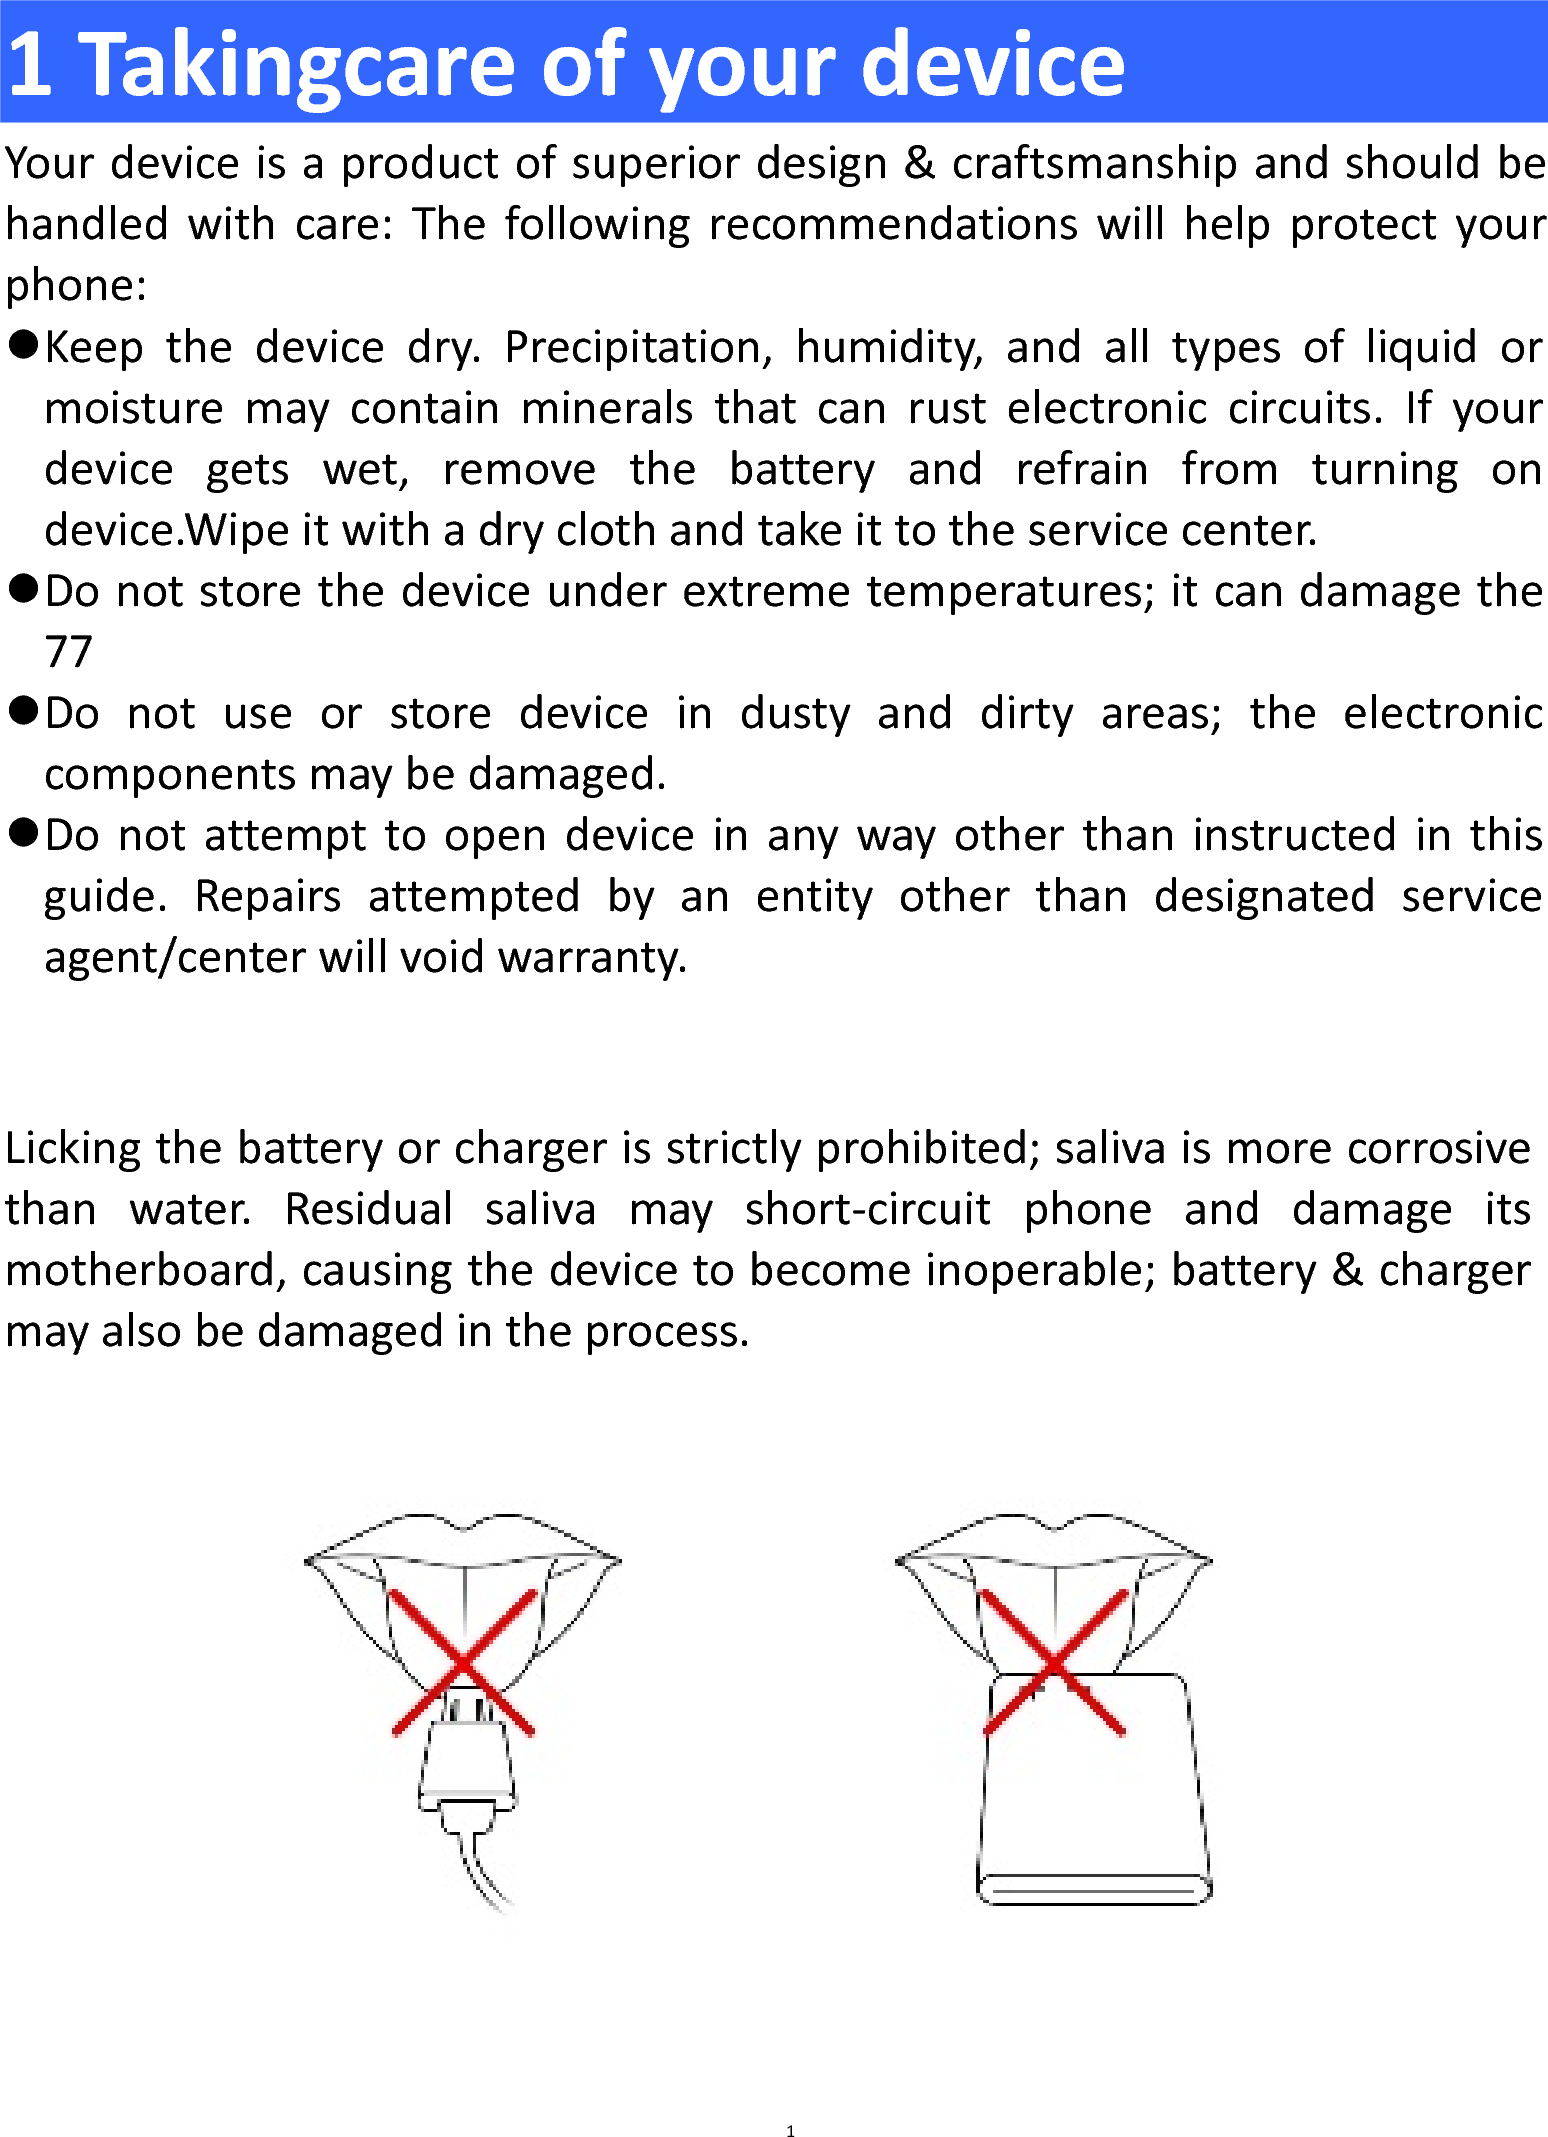  1 Takingcare of your device Your device is a product of superior design &amp; craftsmanship and should be handled with care: The following recommendations will help protect your phone:  Keep  the  device dry. Precipitation, humidity, and all types of liquid or moisture  may  contain minerals that can  rust electronic circuits. If your device gets wet, remove the battery and refrain from turning on device.Wipe it with a dry cloth and take it to the service center.  Do not store the device under extreme temperatures; it can damage the 77  Do not use or store device in dusty and dirty areas; the electronic components may be damaged.  Do not attempt to open device in any way other than instructed in this guide. Repairs attempted by an entity other than designated service agent/center will void warranty.   Licking the battery or charger is strictly prohibited; saliva is more corrosive than water. Residual saliva may short-circuit  phone and damage its motherboard, causing the device to become inoperable; battery &amp; charger may also be damaged in the process.   1 